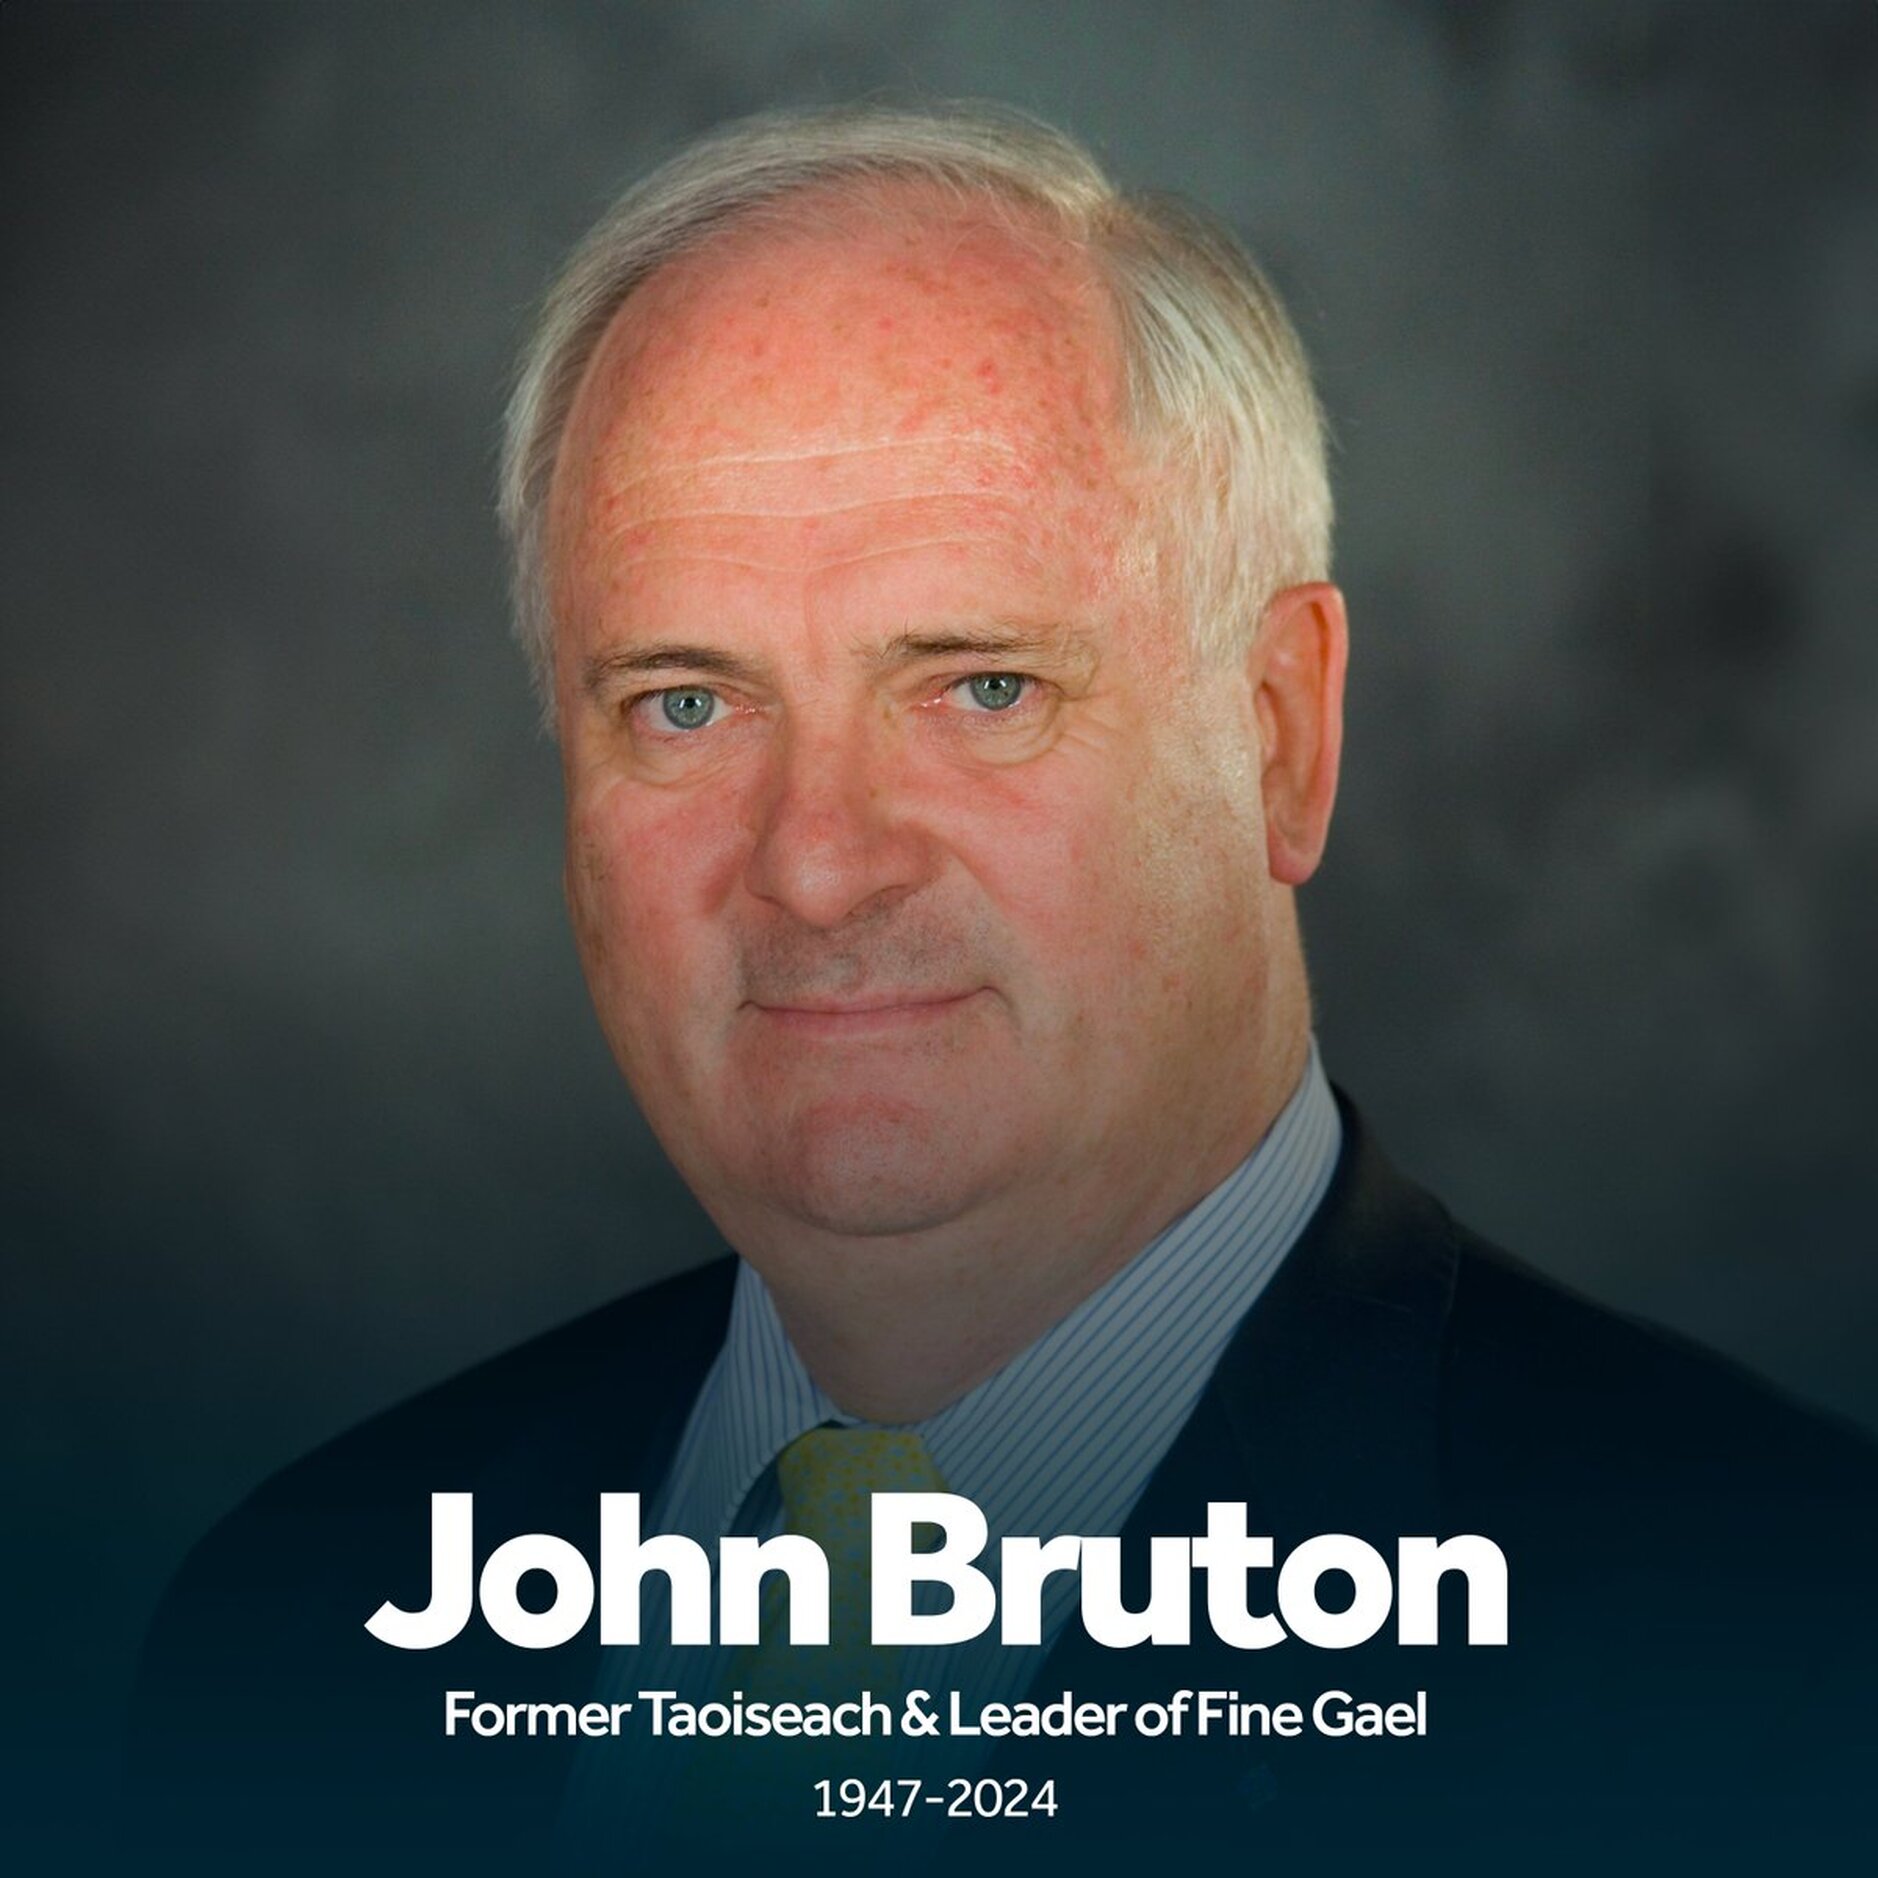 Former Taoiseach John Bruton – Tribute from the Archbishop of Dublin - Archbishop Michael Jackson has paid tribute to former Taoiseach John Bruton (1994–1997) following news of his death today.